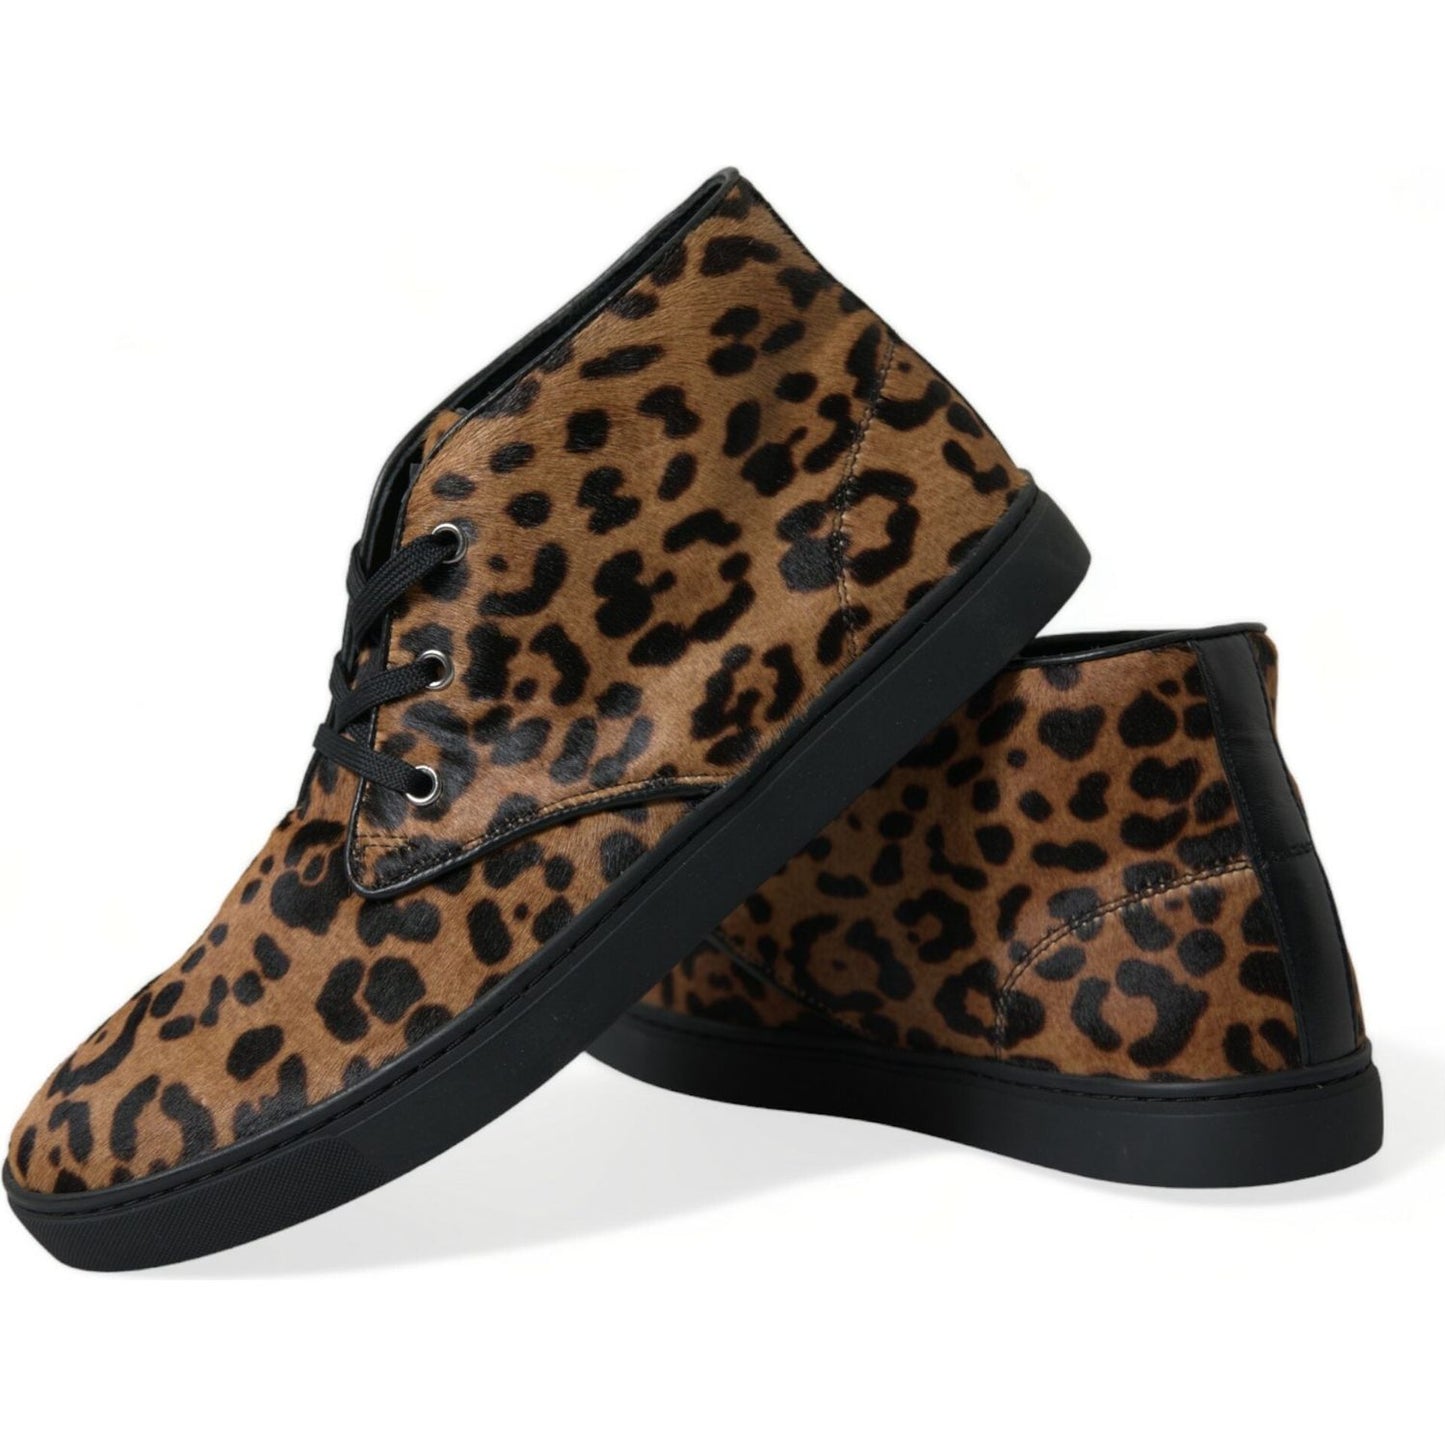 Dolce & Gabbana Elegant Leopard Print Mid-Top Sneakers brown-leopard-pony-hair-leather-sneakers-shoes